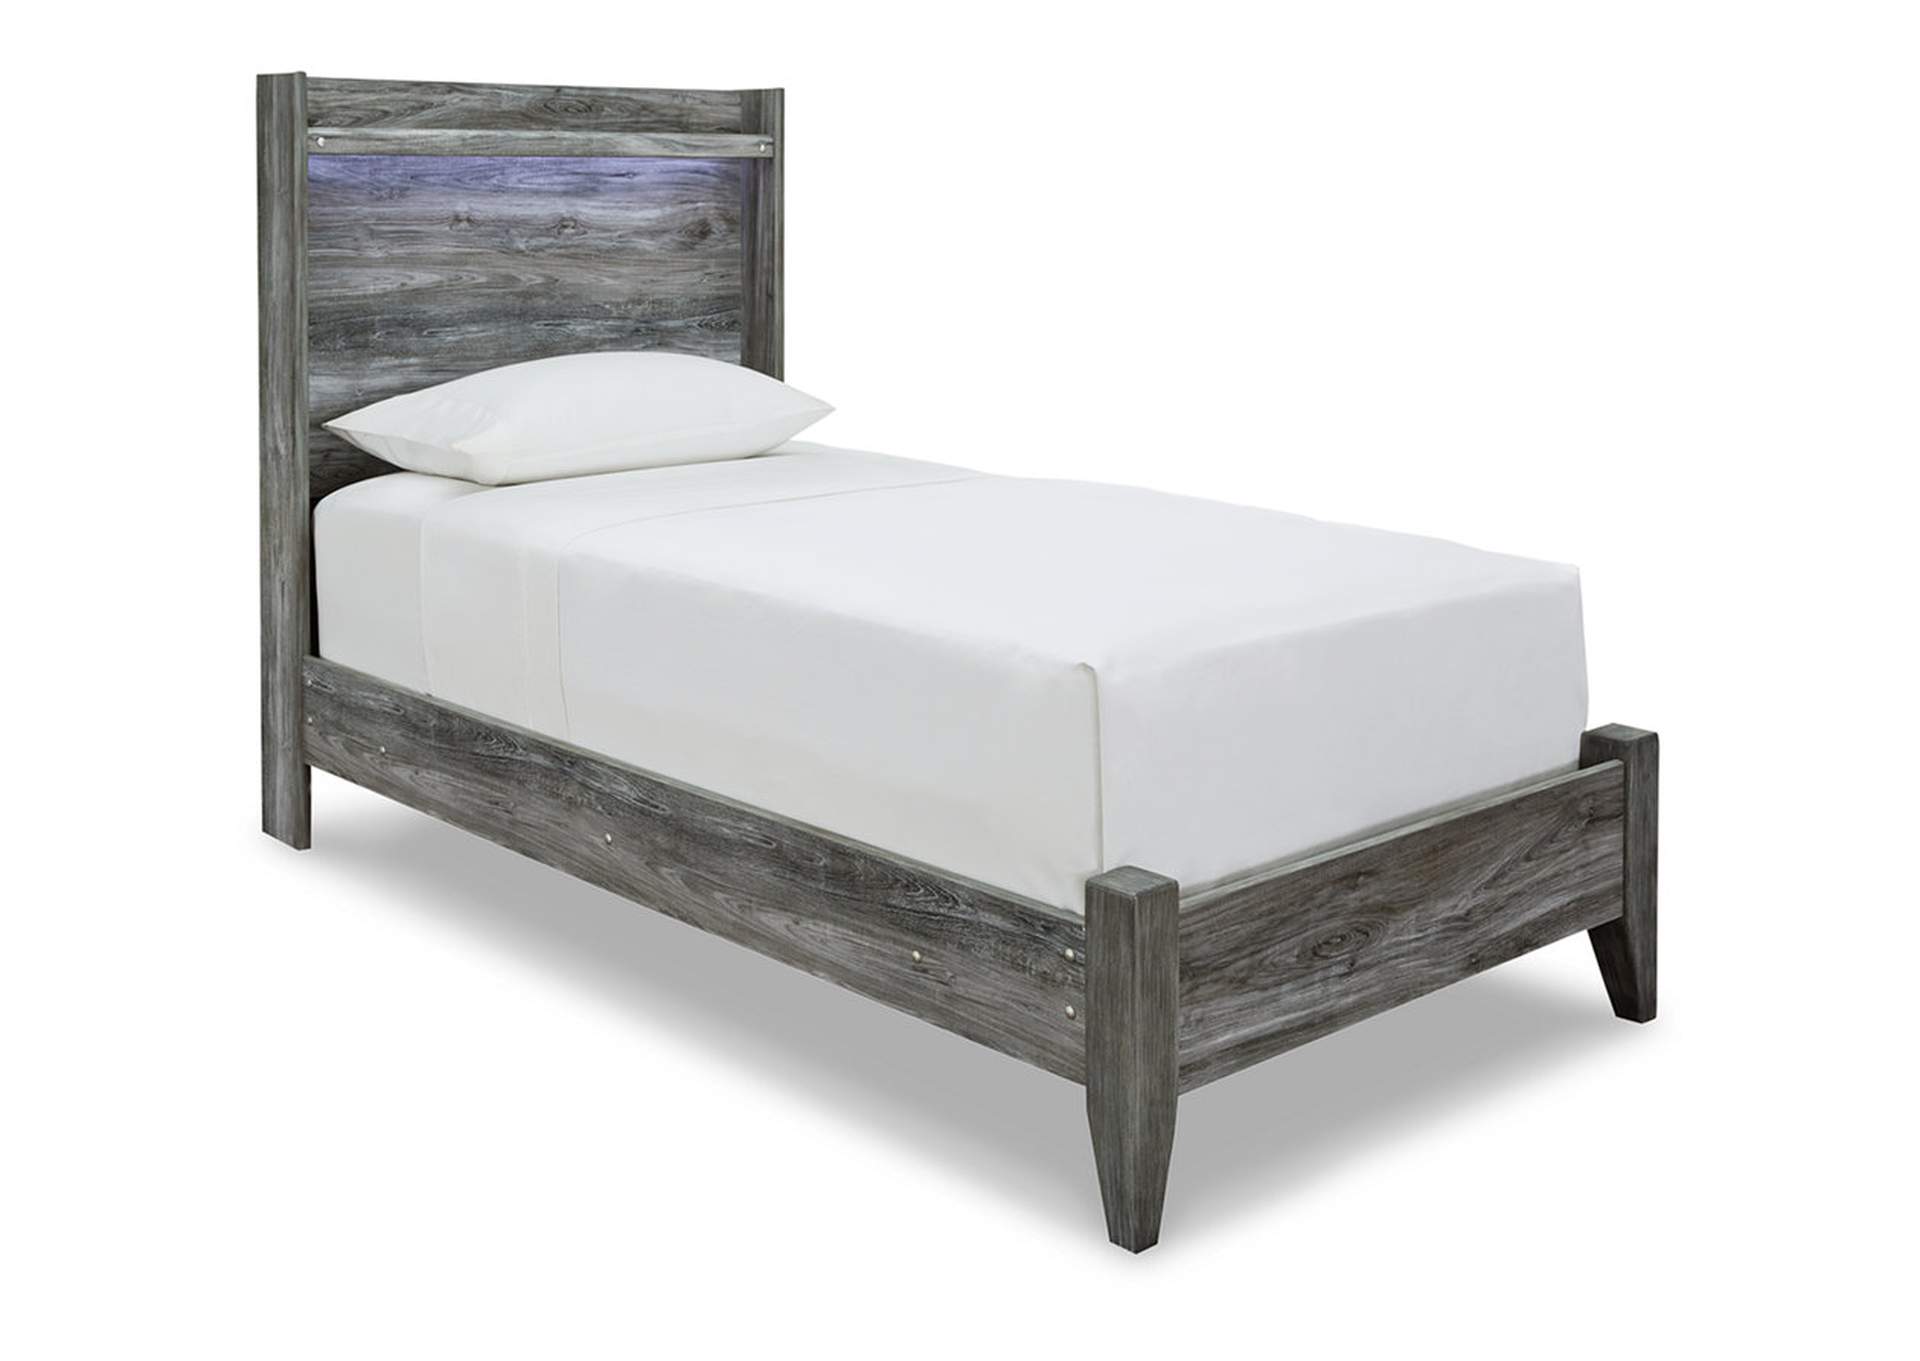 Baystorm Twin Panel Bed,Signature Design By Ashley